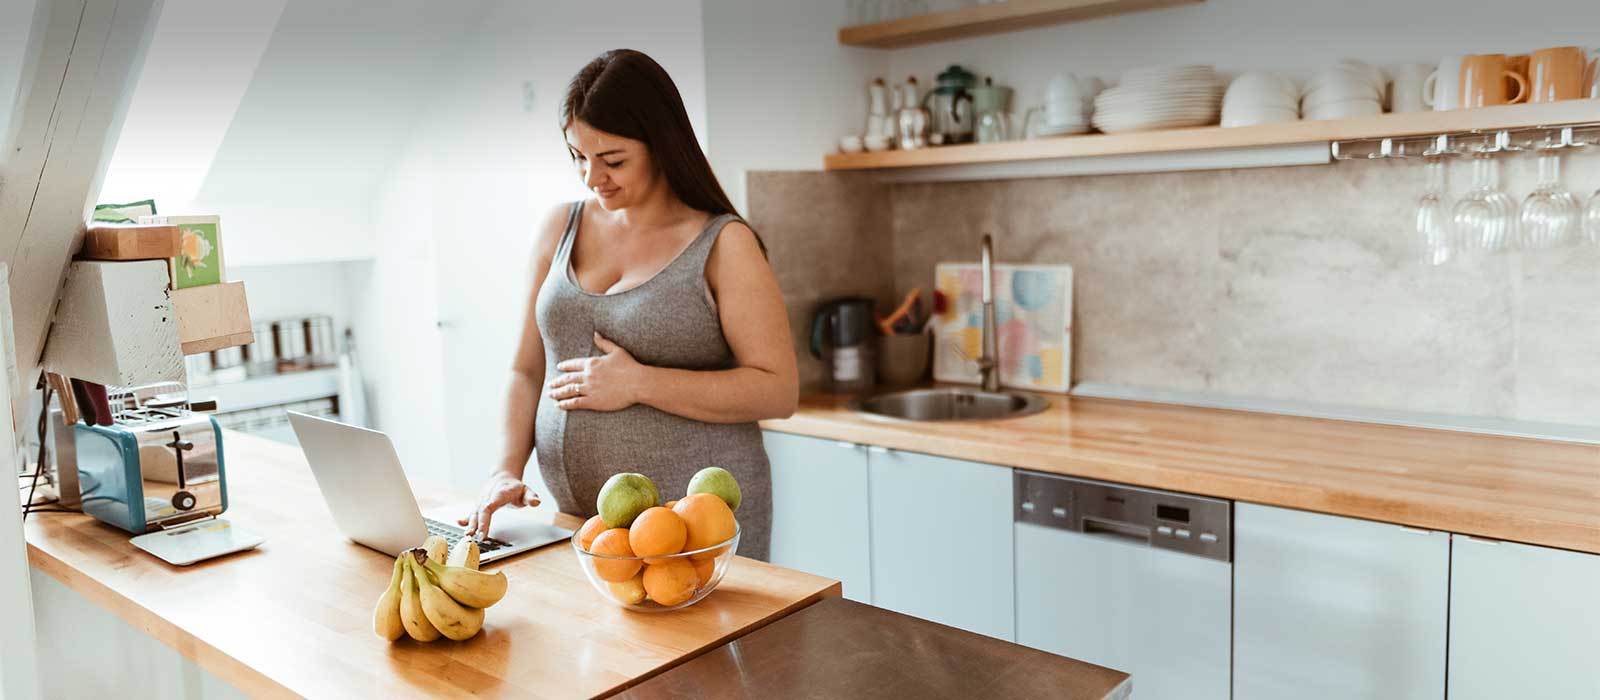 Pregnant woman viewing laptop in kitchen.